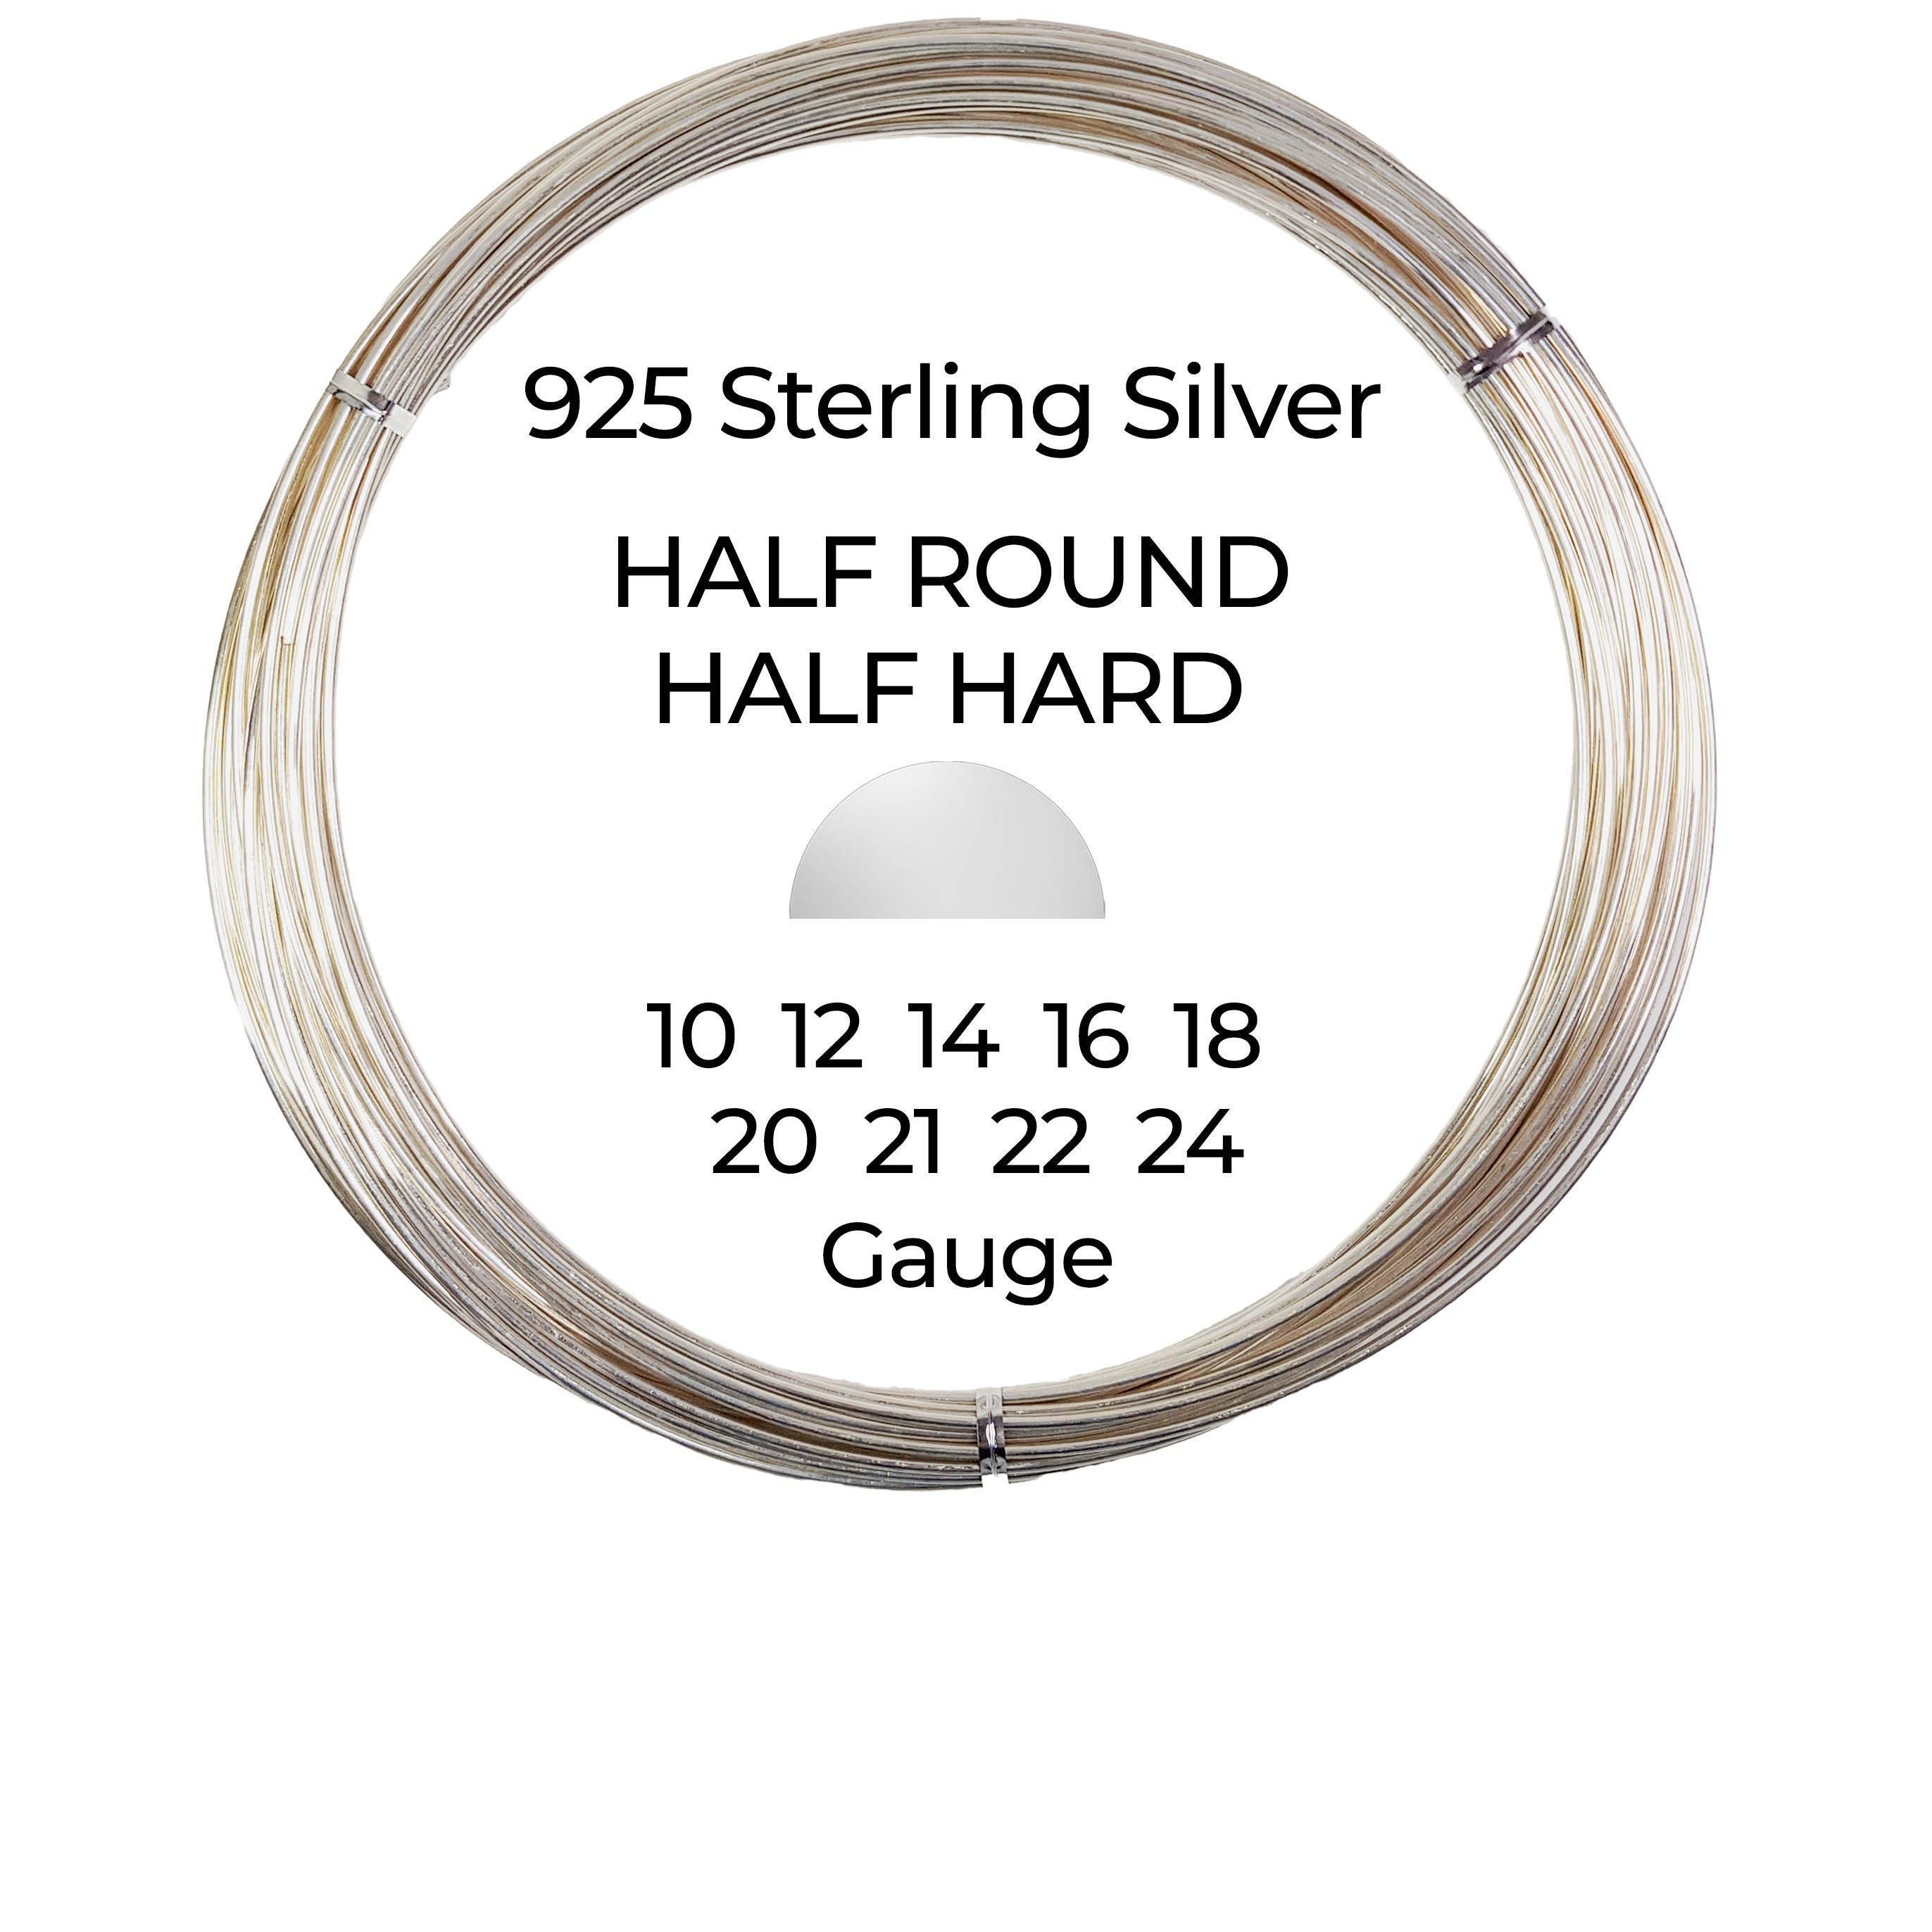 24 Gauge Round Dead Soft .925 Sterling Silver Wire: Jewelry Making Supplies, Instructions